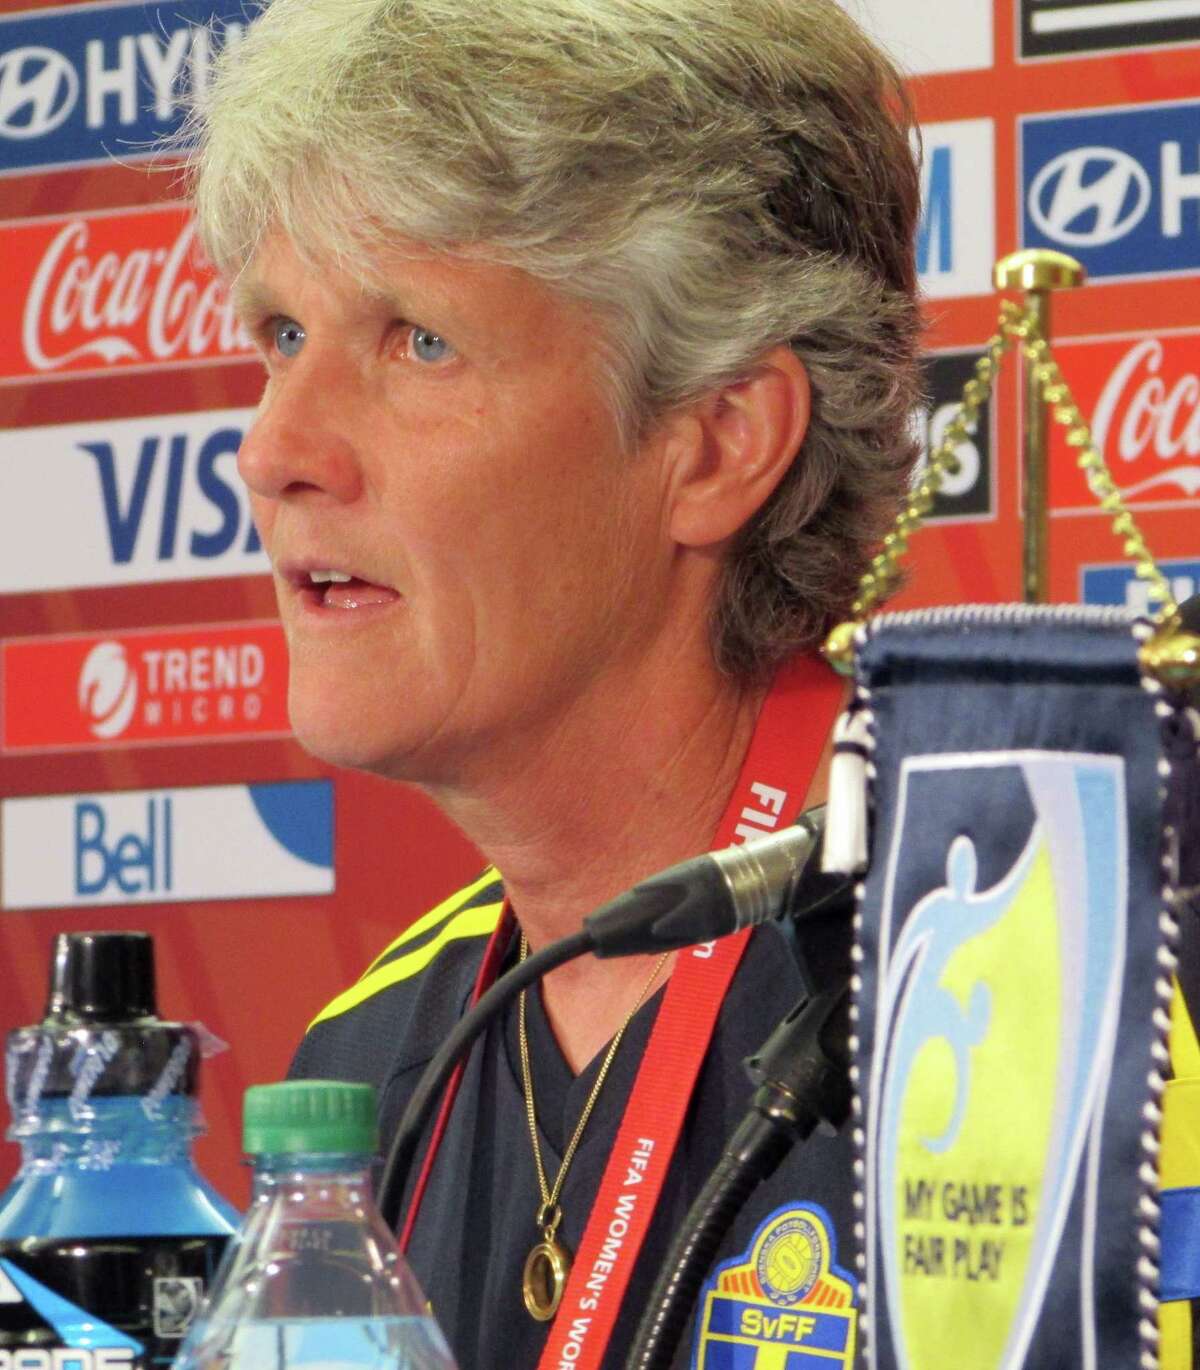 Sweden coach Pia Sundhage speaks during a news conference at the FIFA Women’s World Cup on Thursday in Winnipeg, Manitoba. Sundhage will coach against her old team, the United States, when they play in a first-round match.